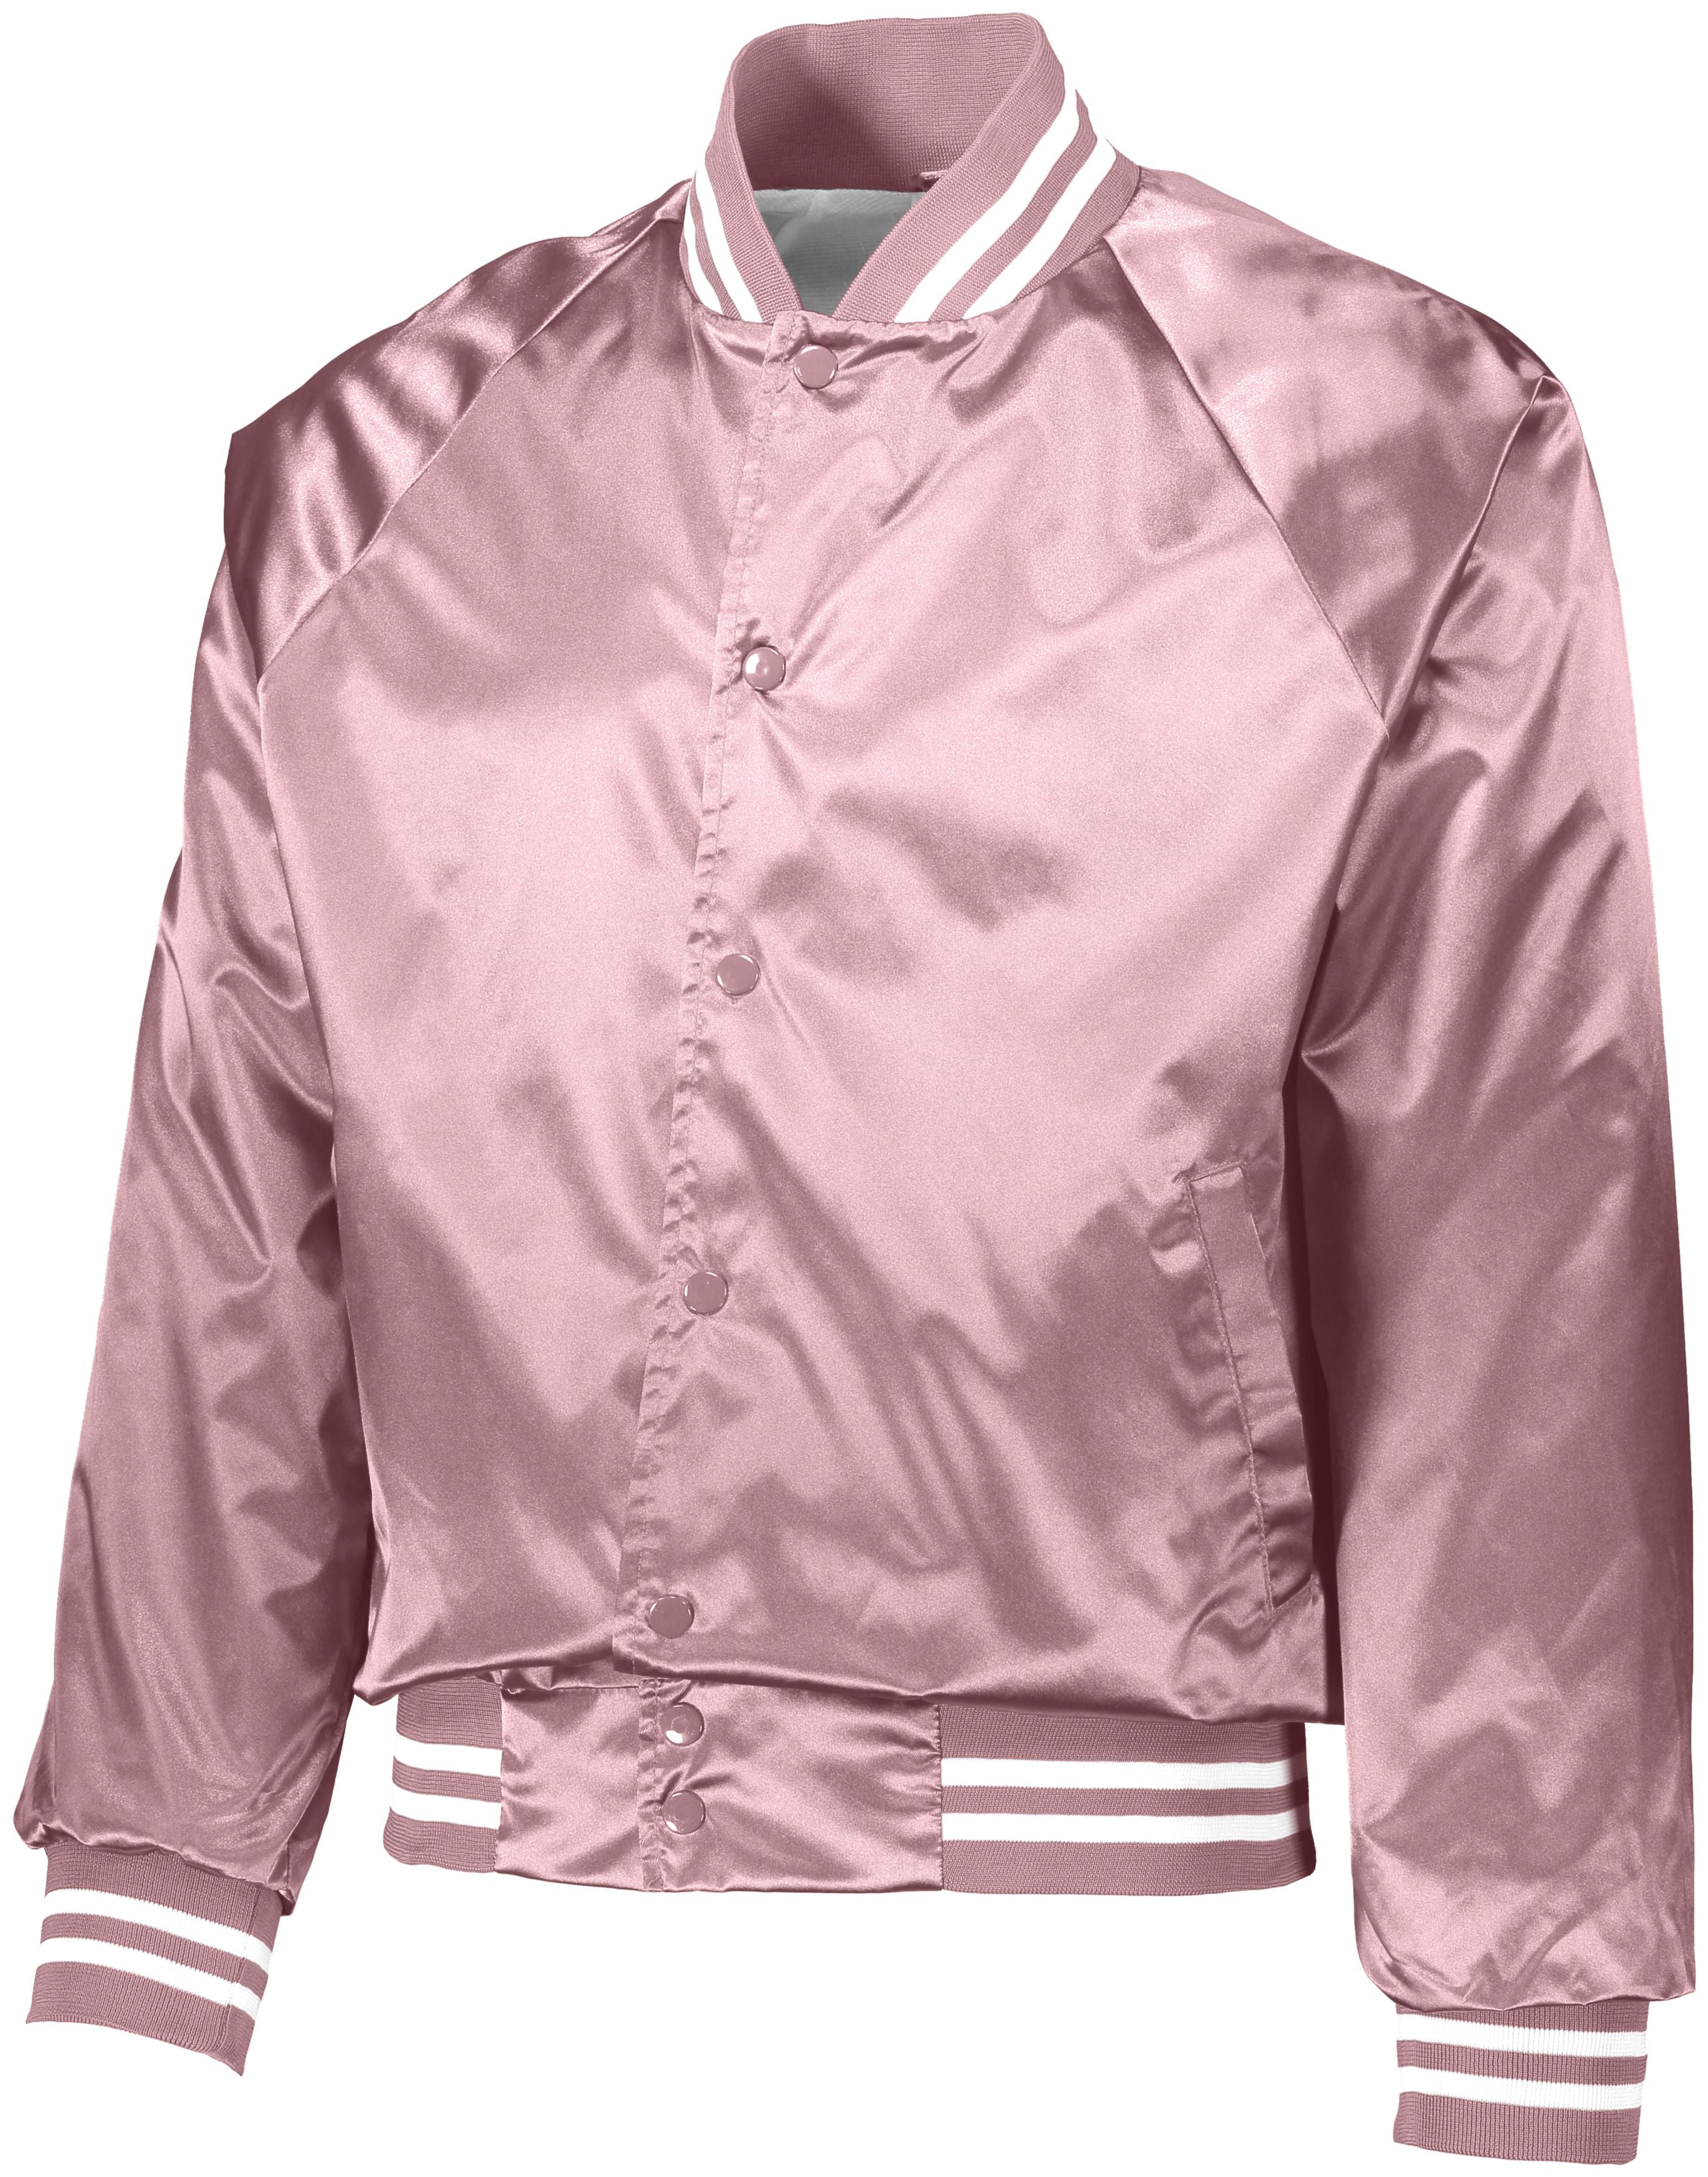 Augusta Sportswear Satin Baseball Jacket/Striped Trim in Light Pink/White  -Part of the Adult, Adult-Jacket, Augusta-Products, Baseball, Outerwear, All-Sports, All-Sports-1 product lines at KanaleyCreations.com